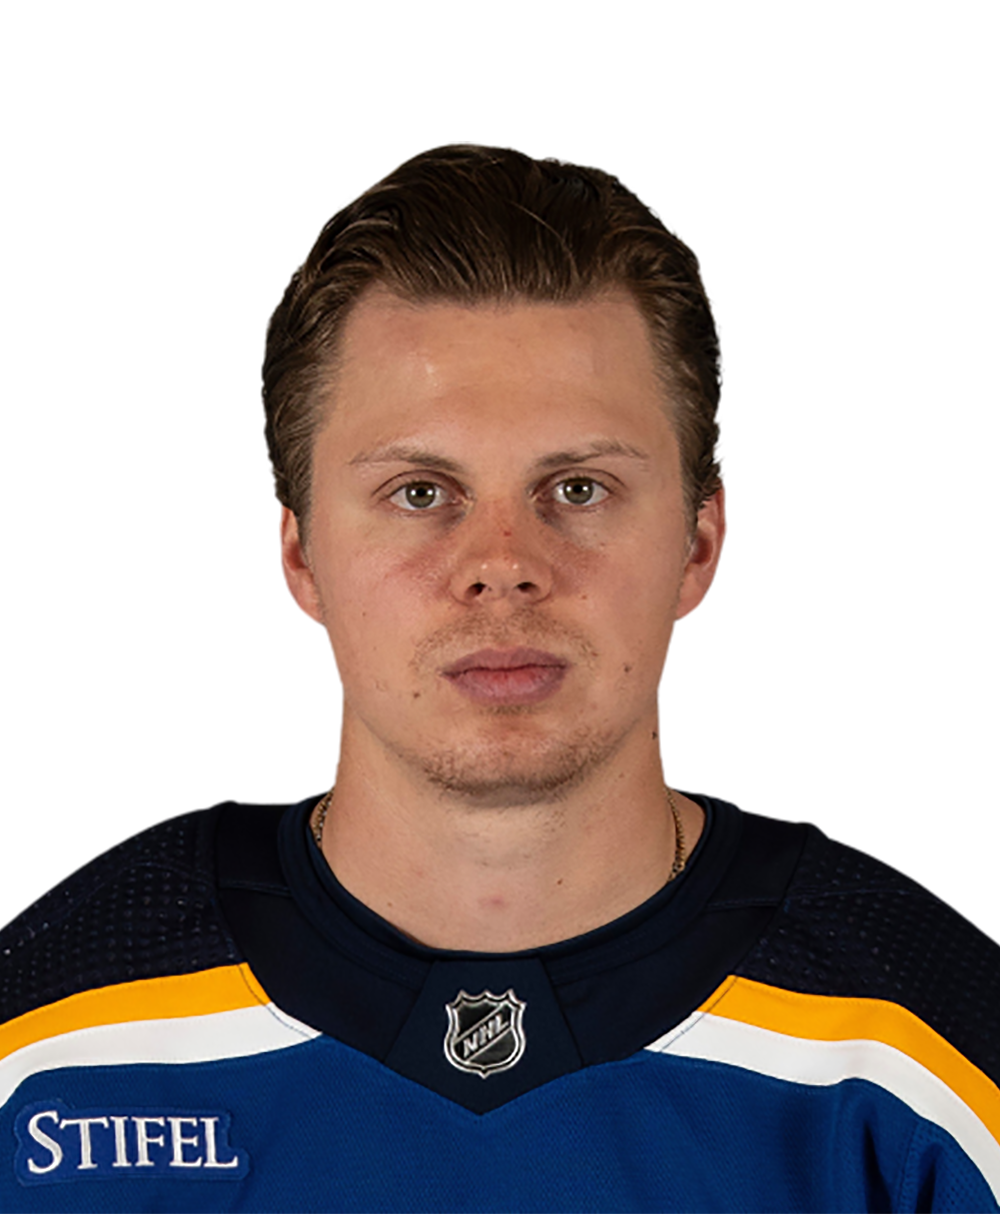 What is going on with Kasperi Kapanen right now? - PensBurgh